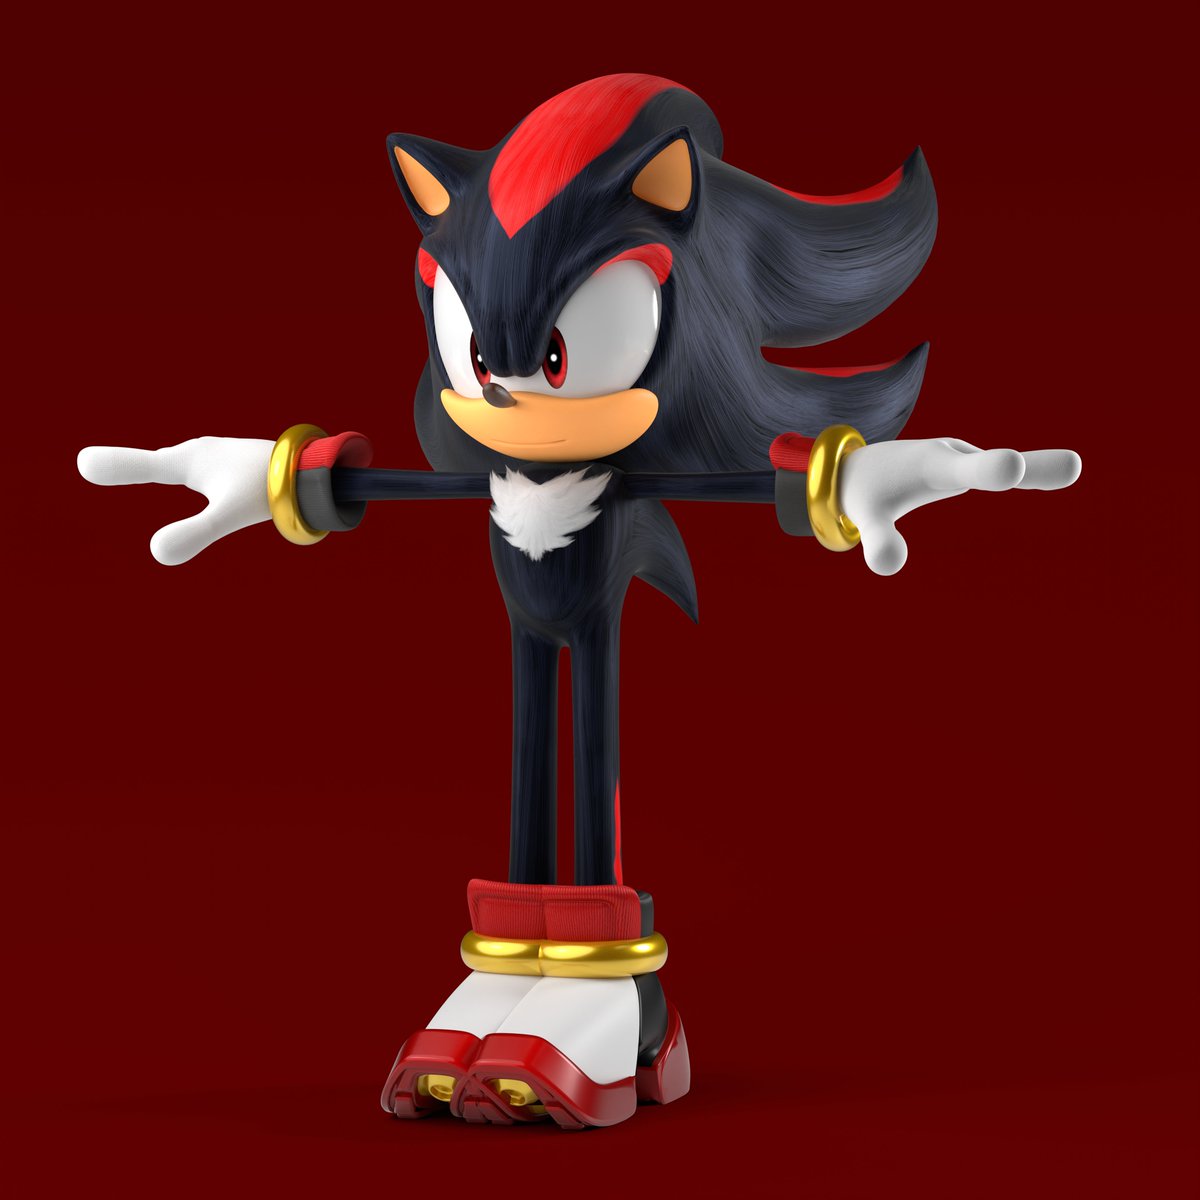 updated mats, darker fur and more accurate skin color
#SonicTheHedeghog #b3d